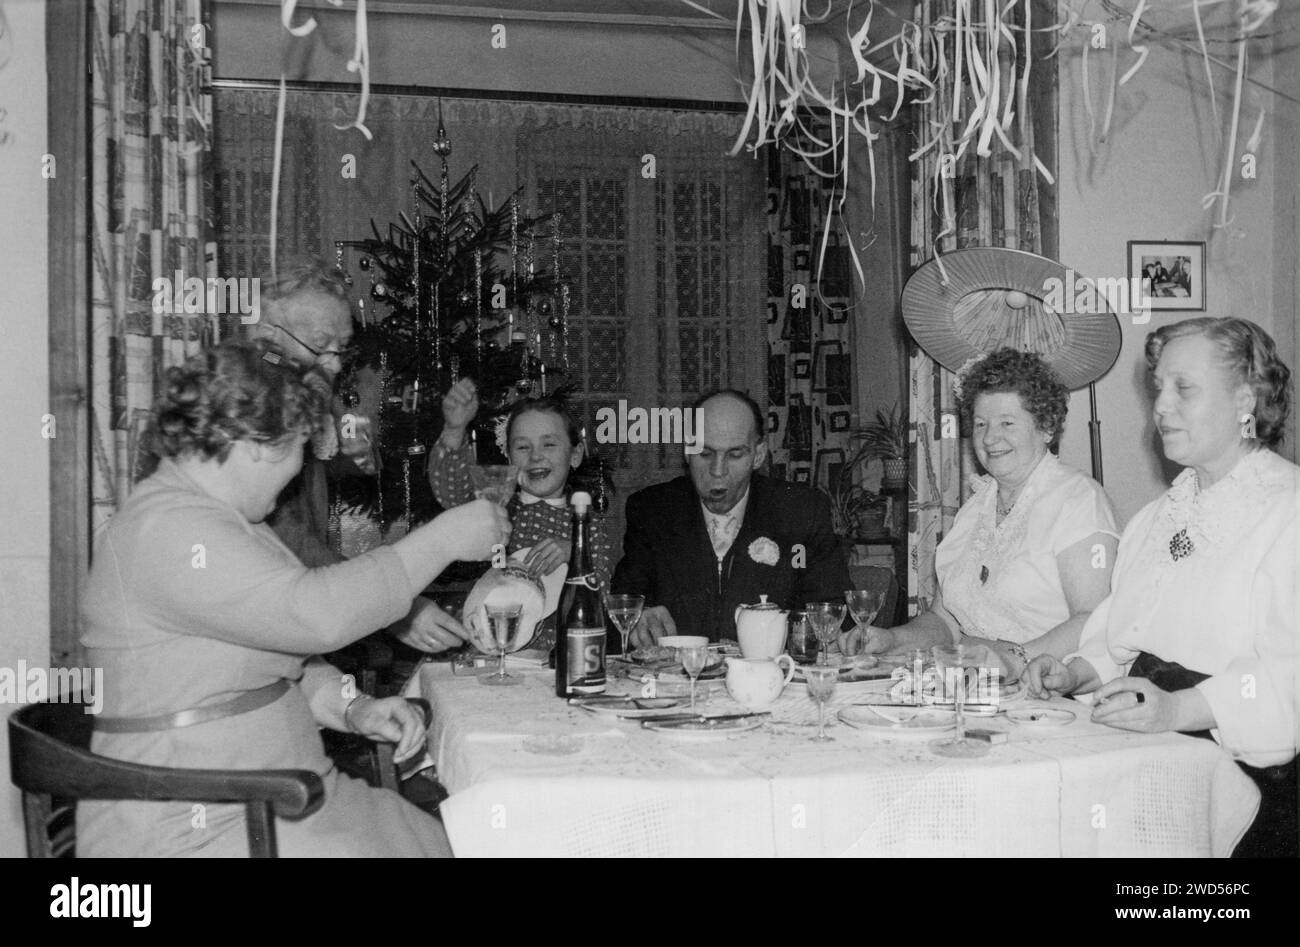 An antique photo with shows a company of men, women and girls6 celebrating Christmas at a table against the backdrop of a Christmas tree. Landau in de Stock Photo